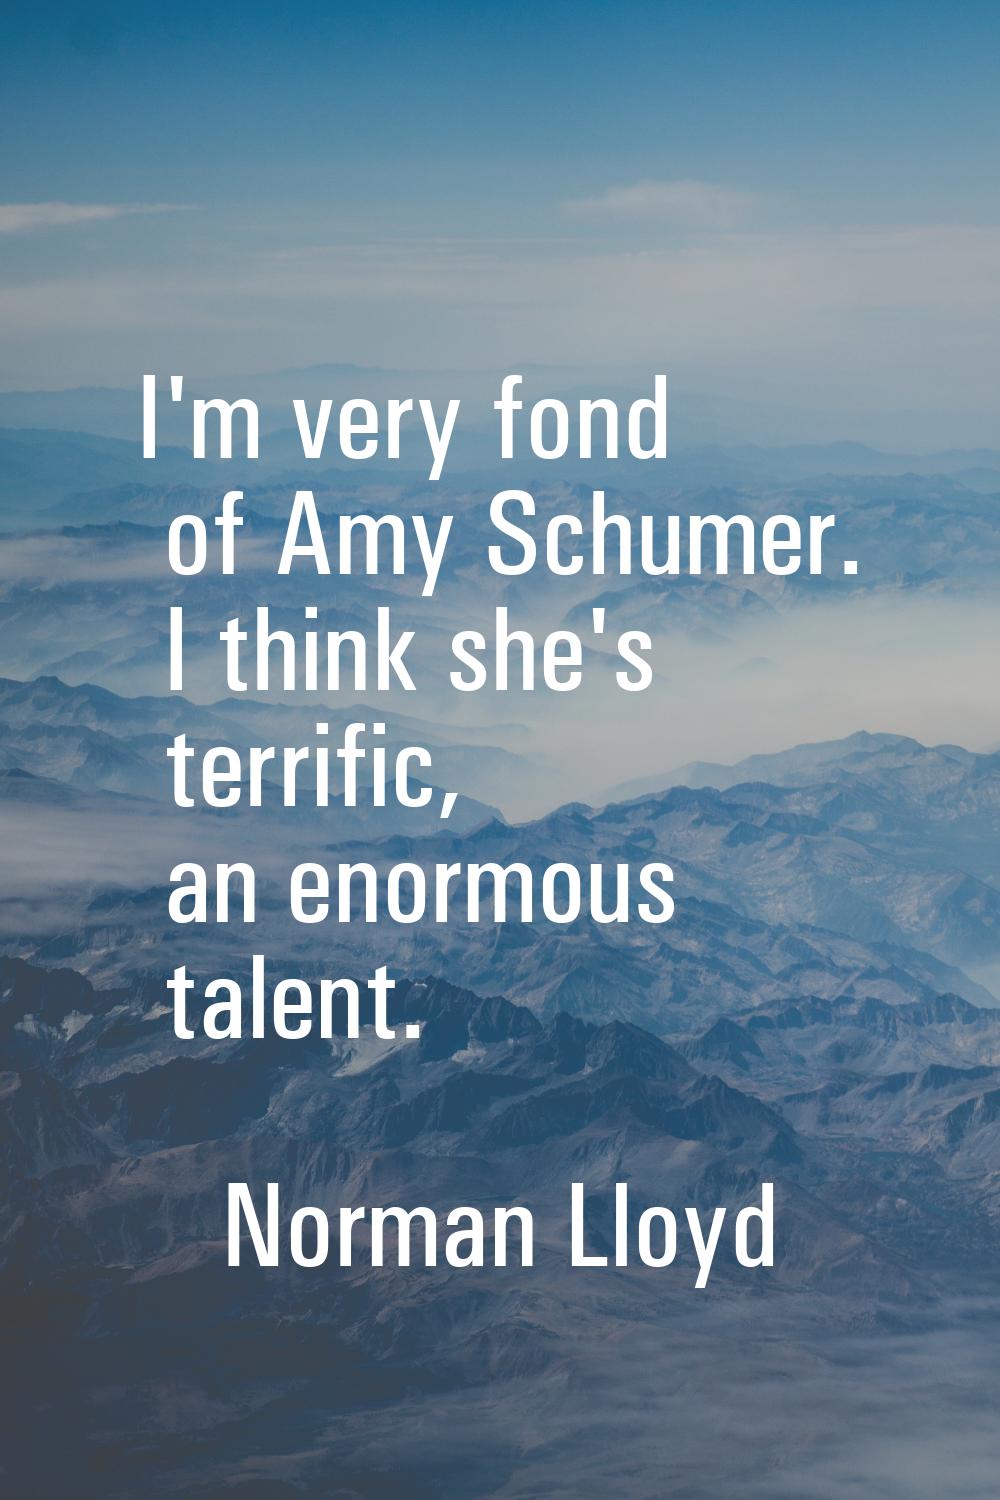 I'm very fond of Amy Schumer. I think she's terrific, an enormous talent.